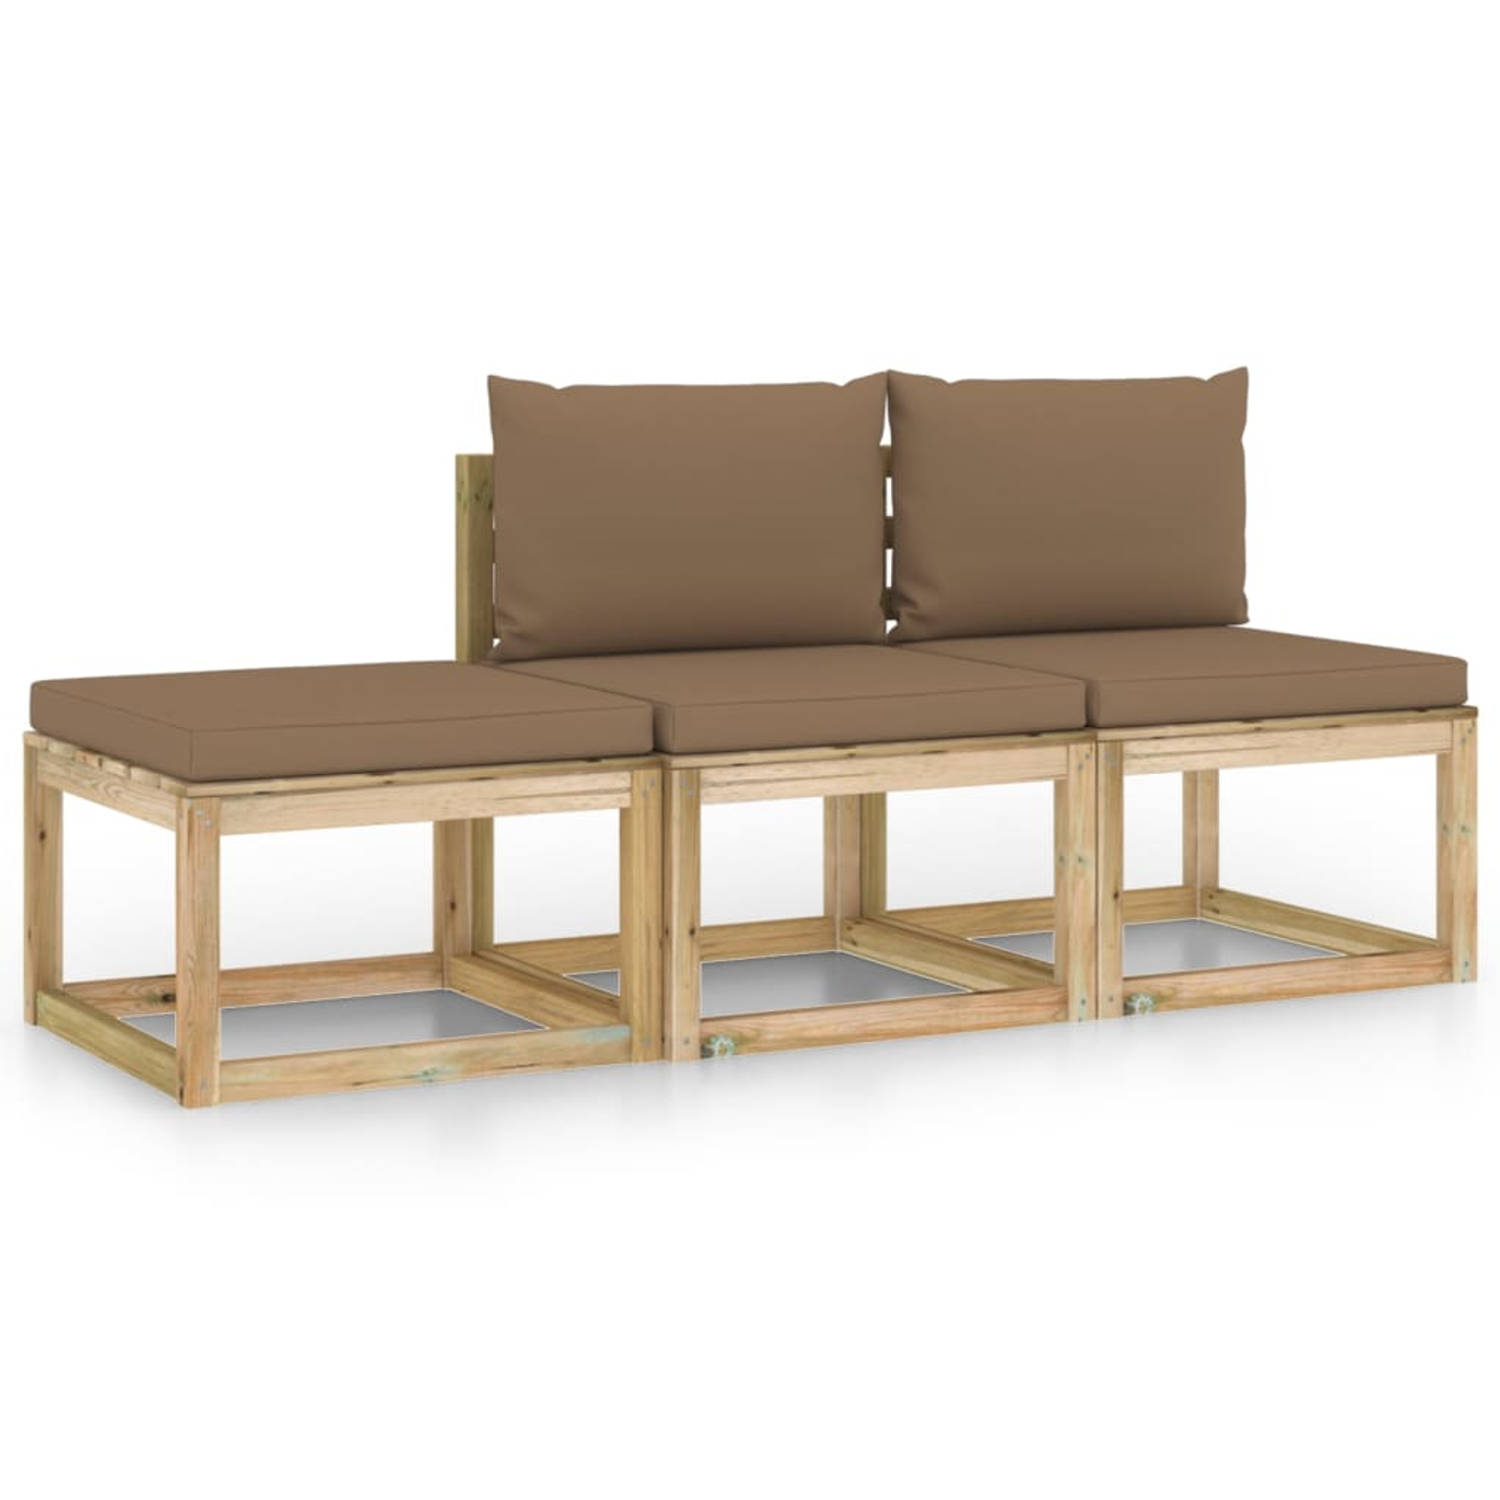 The Living Store 3-delige Loungeset met taupe kussens - Tuinset